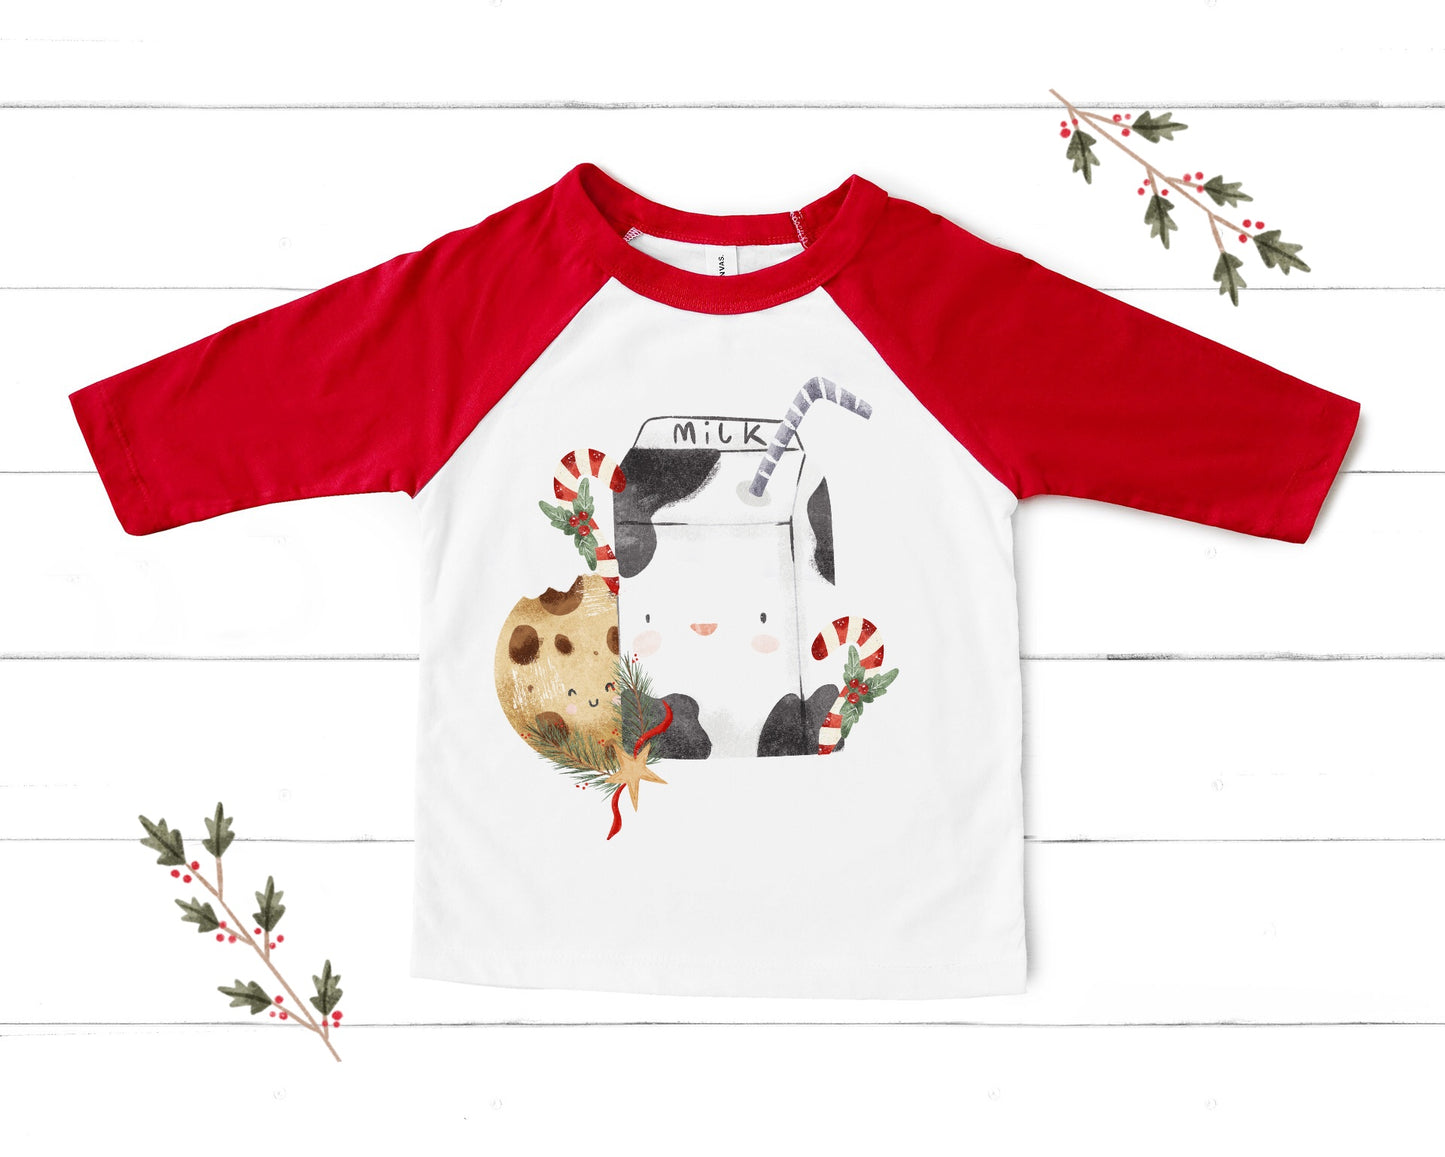 Festive Milk and Cookies PNG